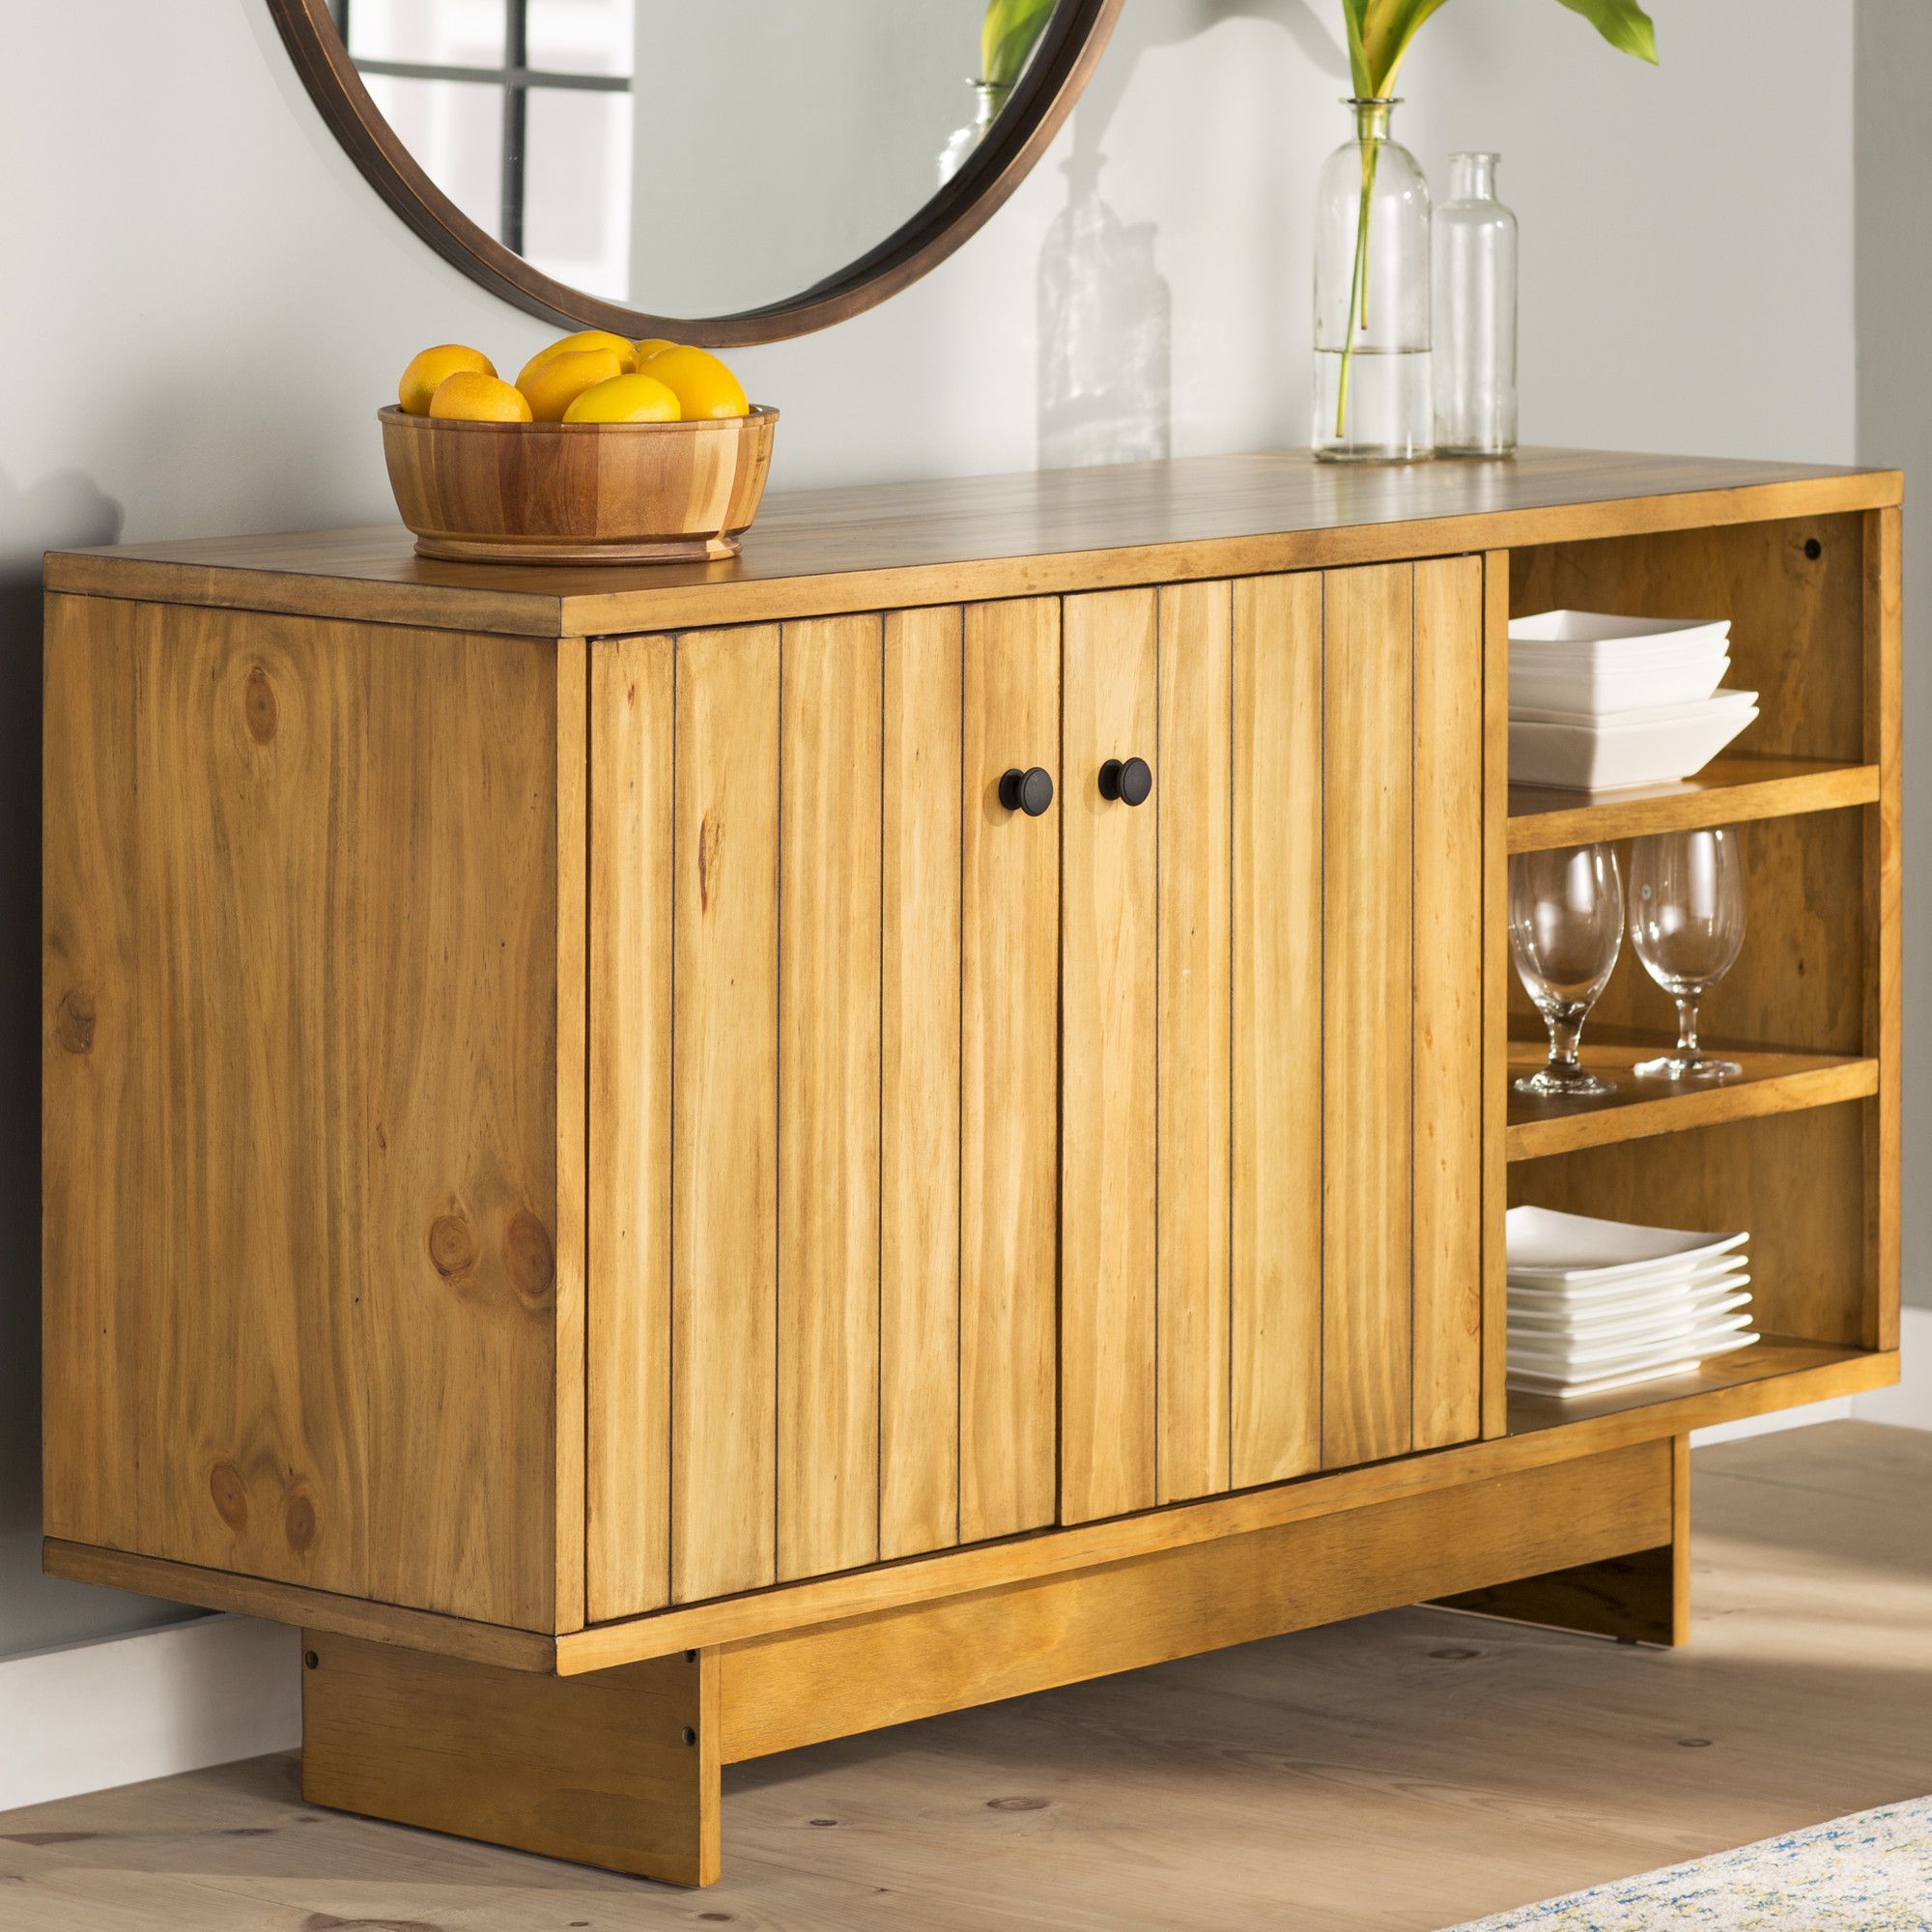 Avenal Sideboard | Products Intended For Recent Avenal Sideboards (View 3 of 20)